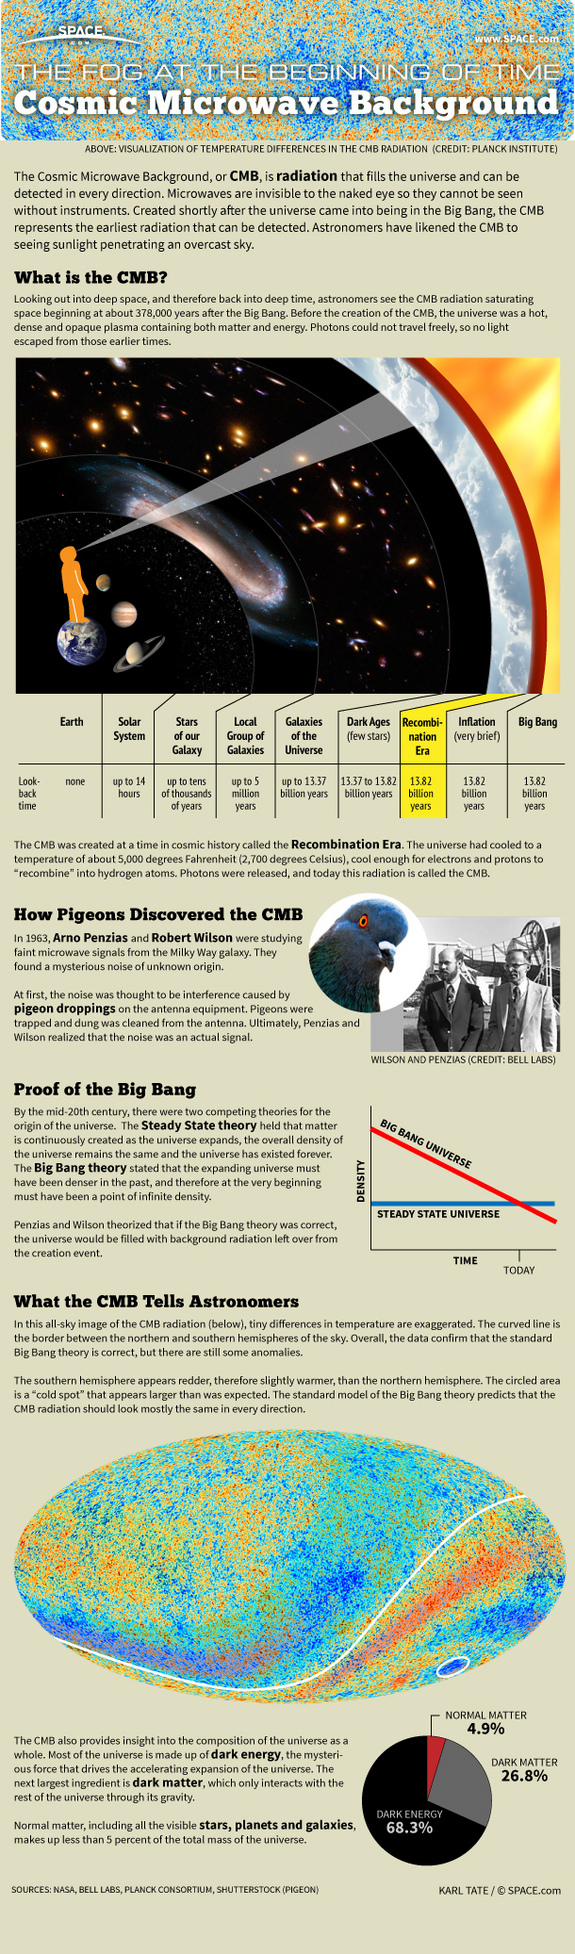 Find out how cosmic microwave background radiation reveals the secrets of the universe in this SPACE.com Infographic.